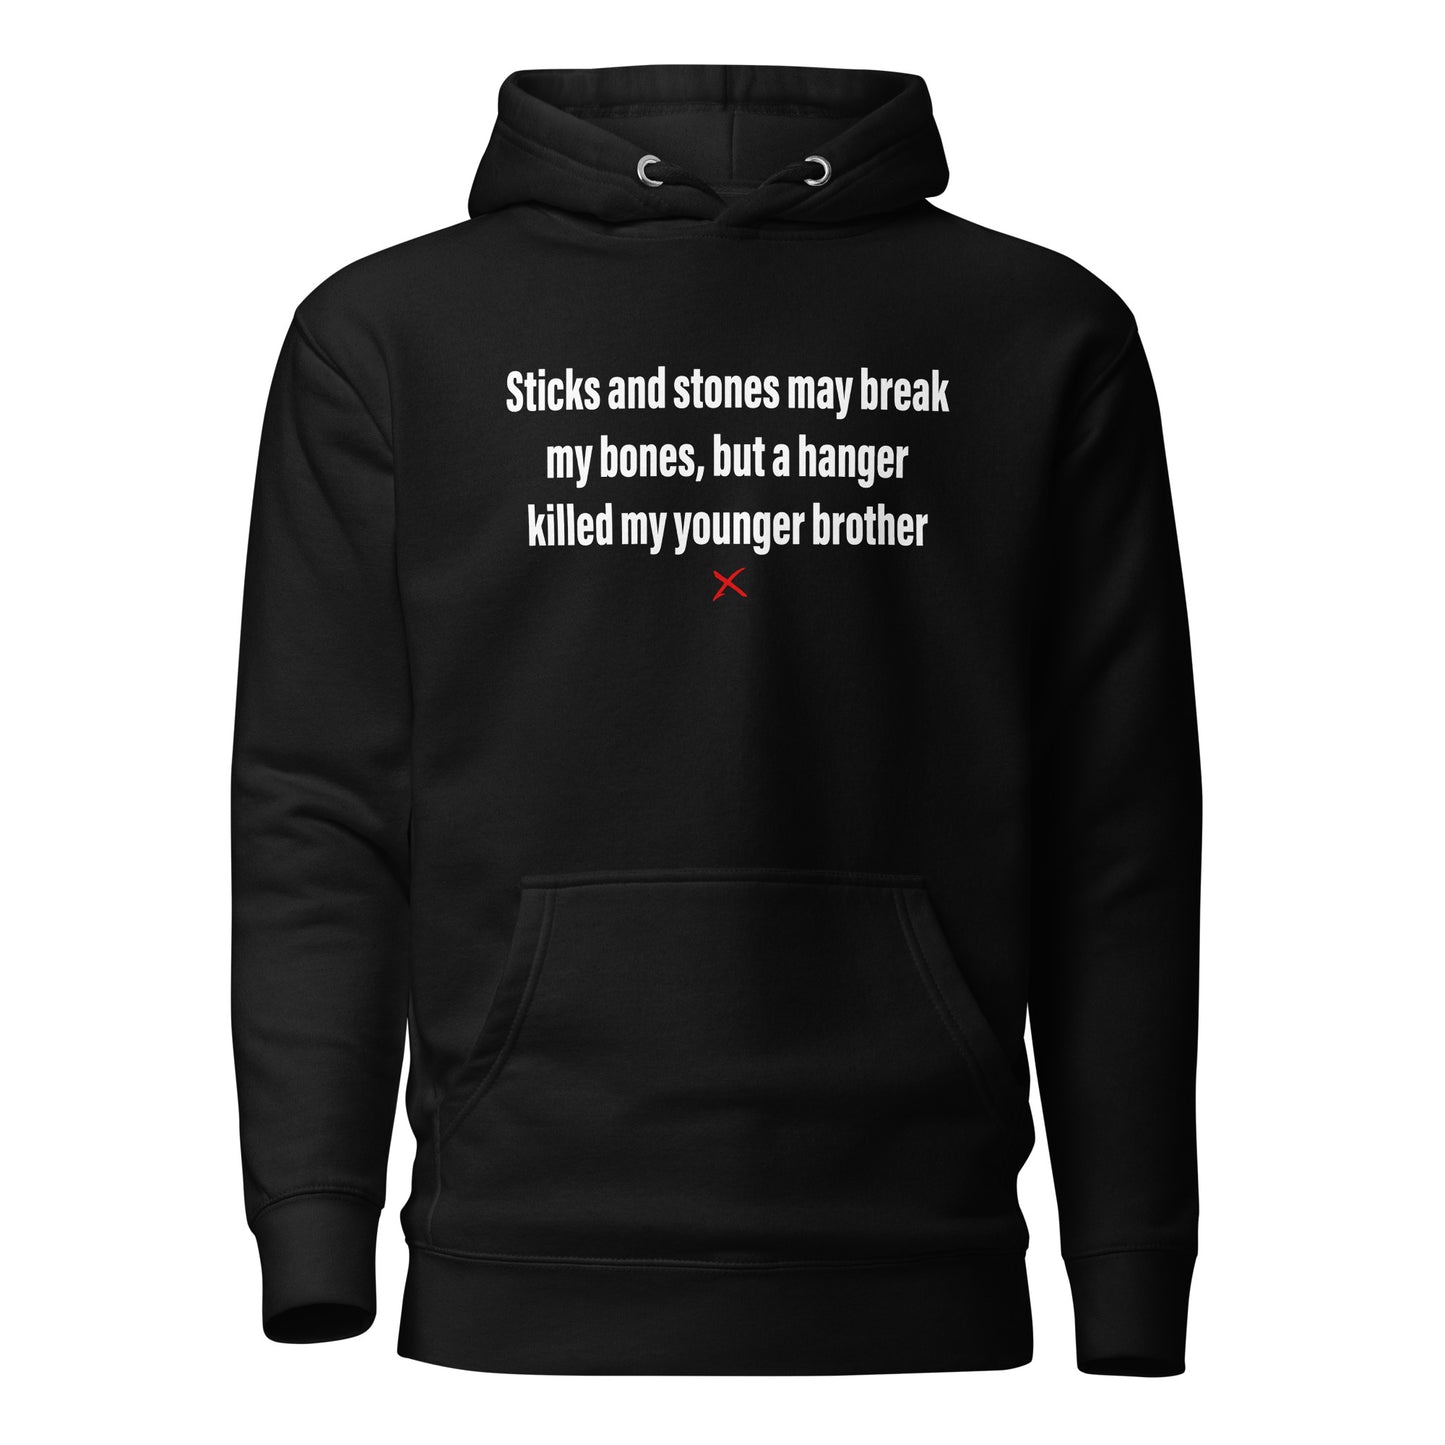 Sticks and stones may break my bones, but a hanger killed my younger brother - Hoodie